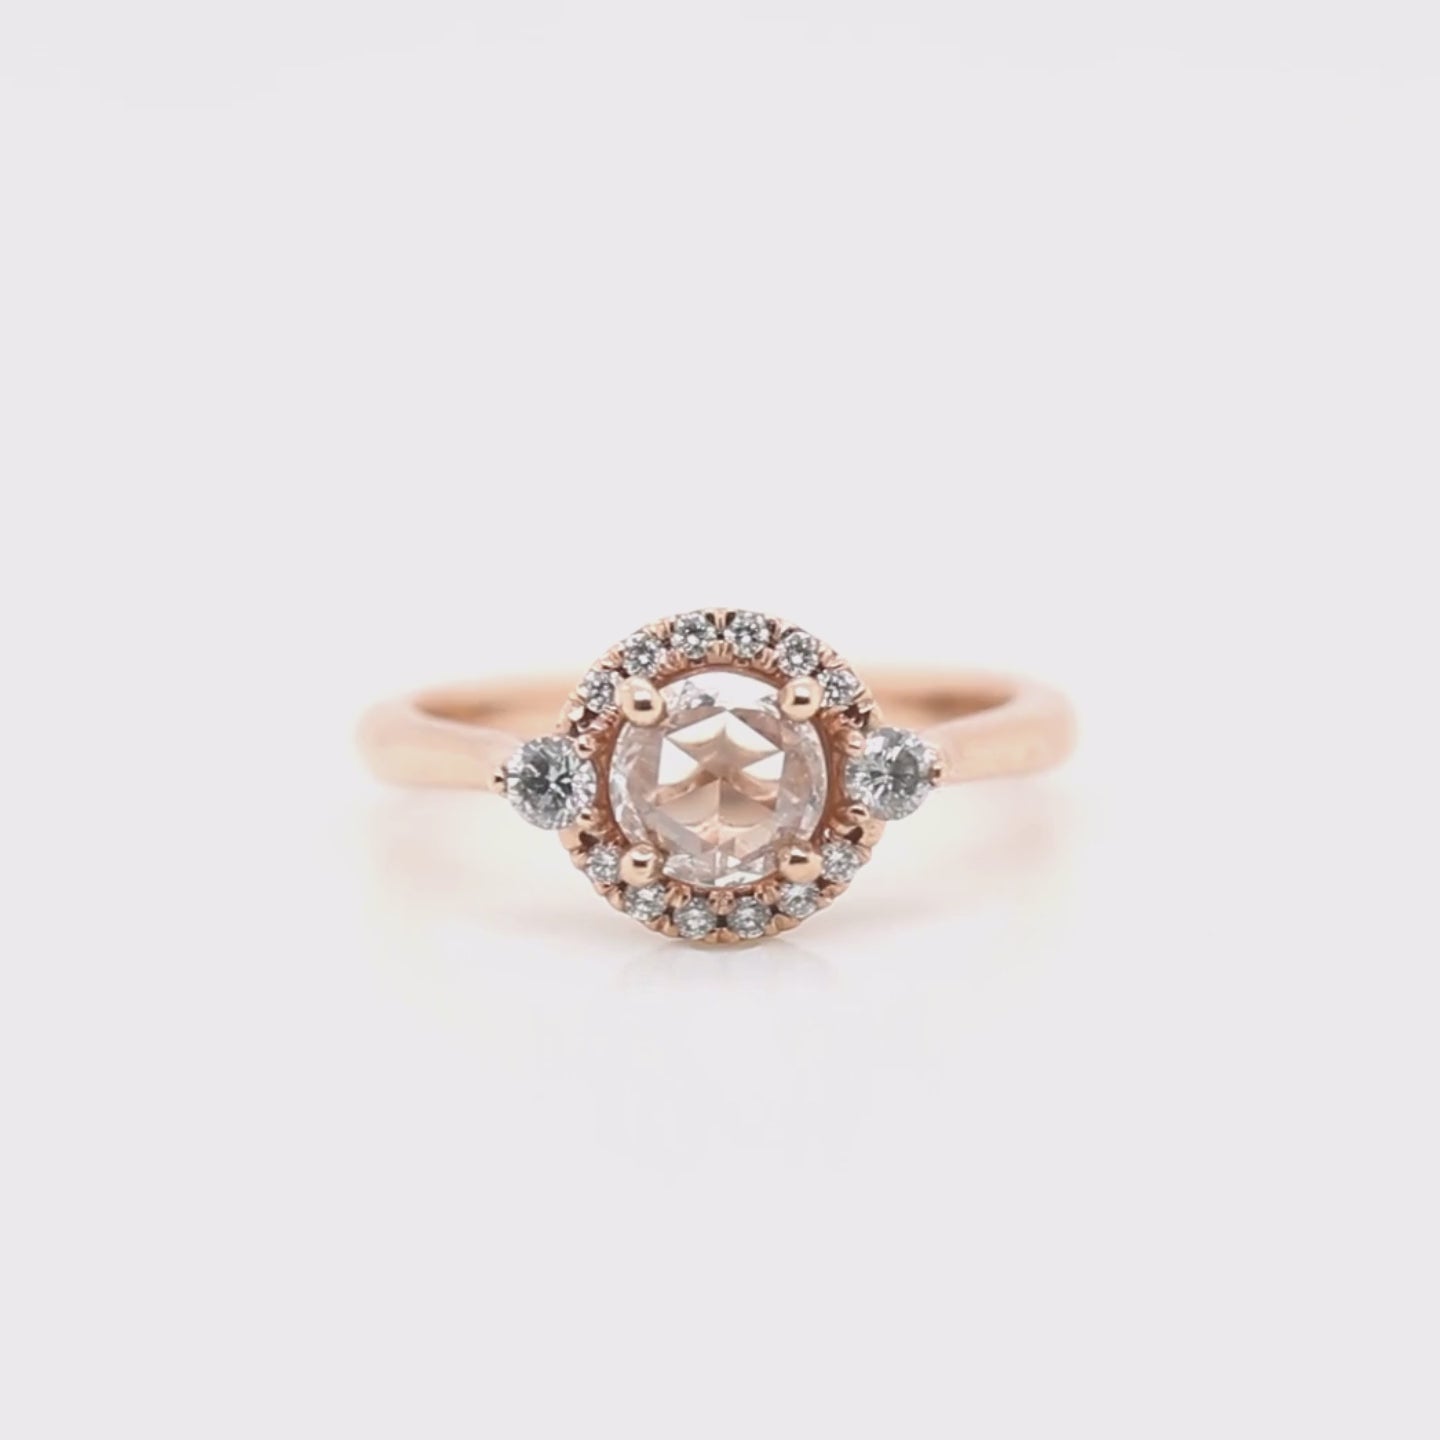 Vanessa Ring with 0.41 Carat Rose Cut Clear Round Diamond and Natural Diamond Accents in 10k Rose Gold - Ready to Size and Ship